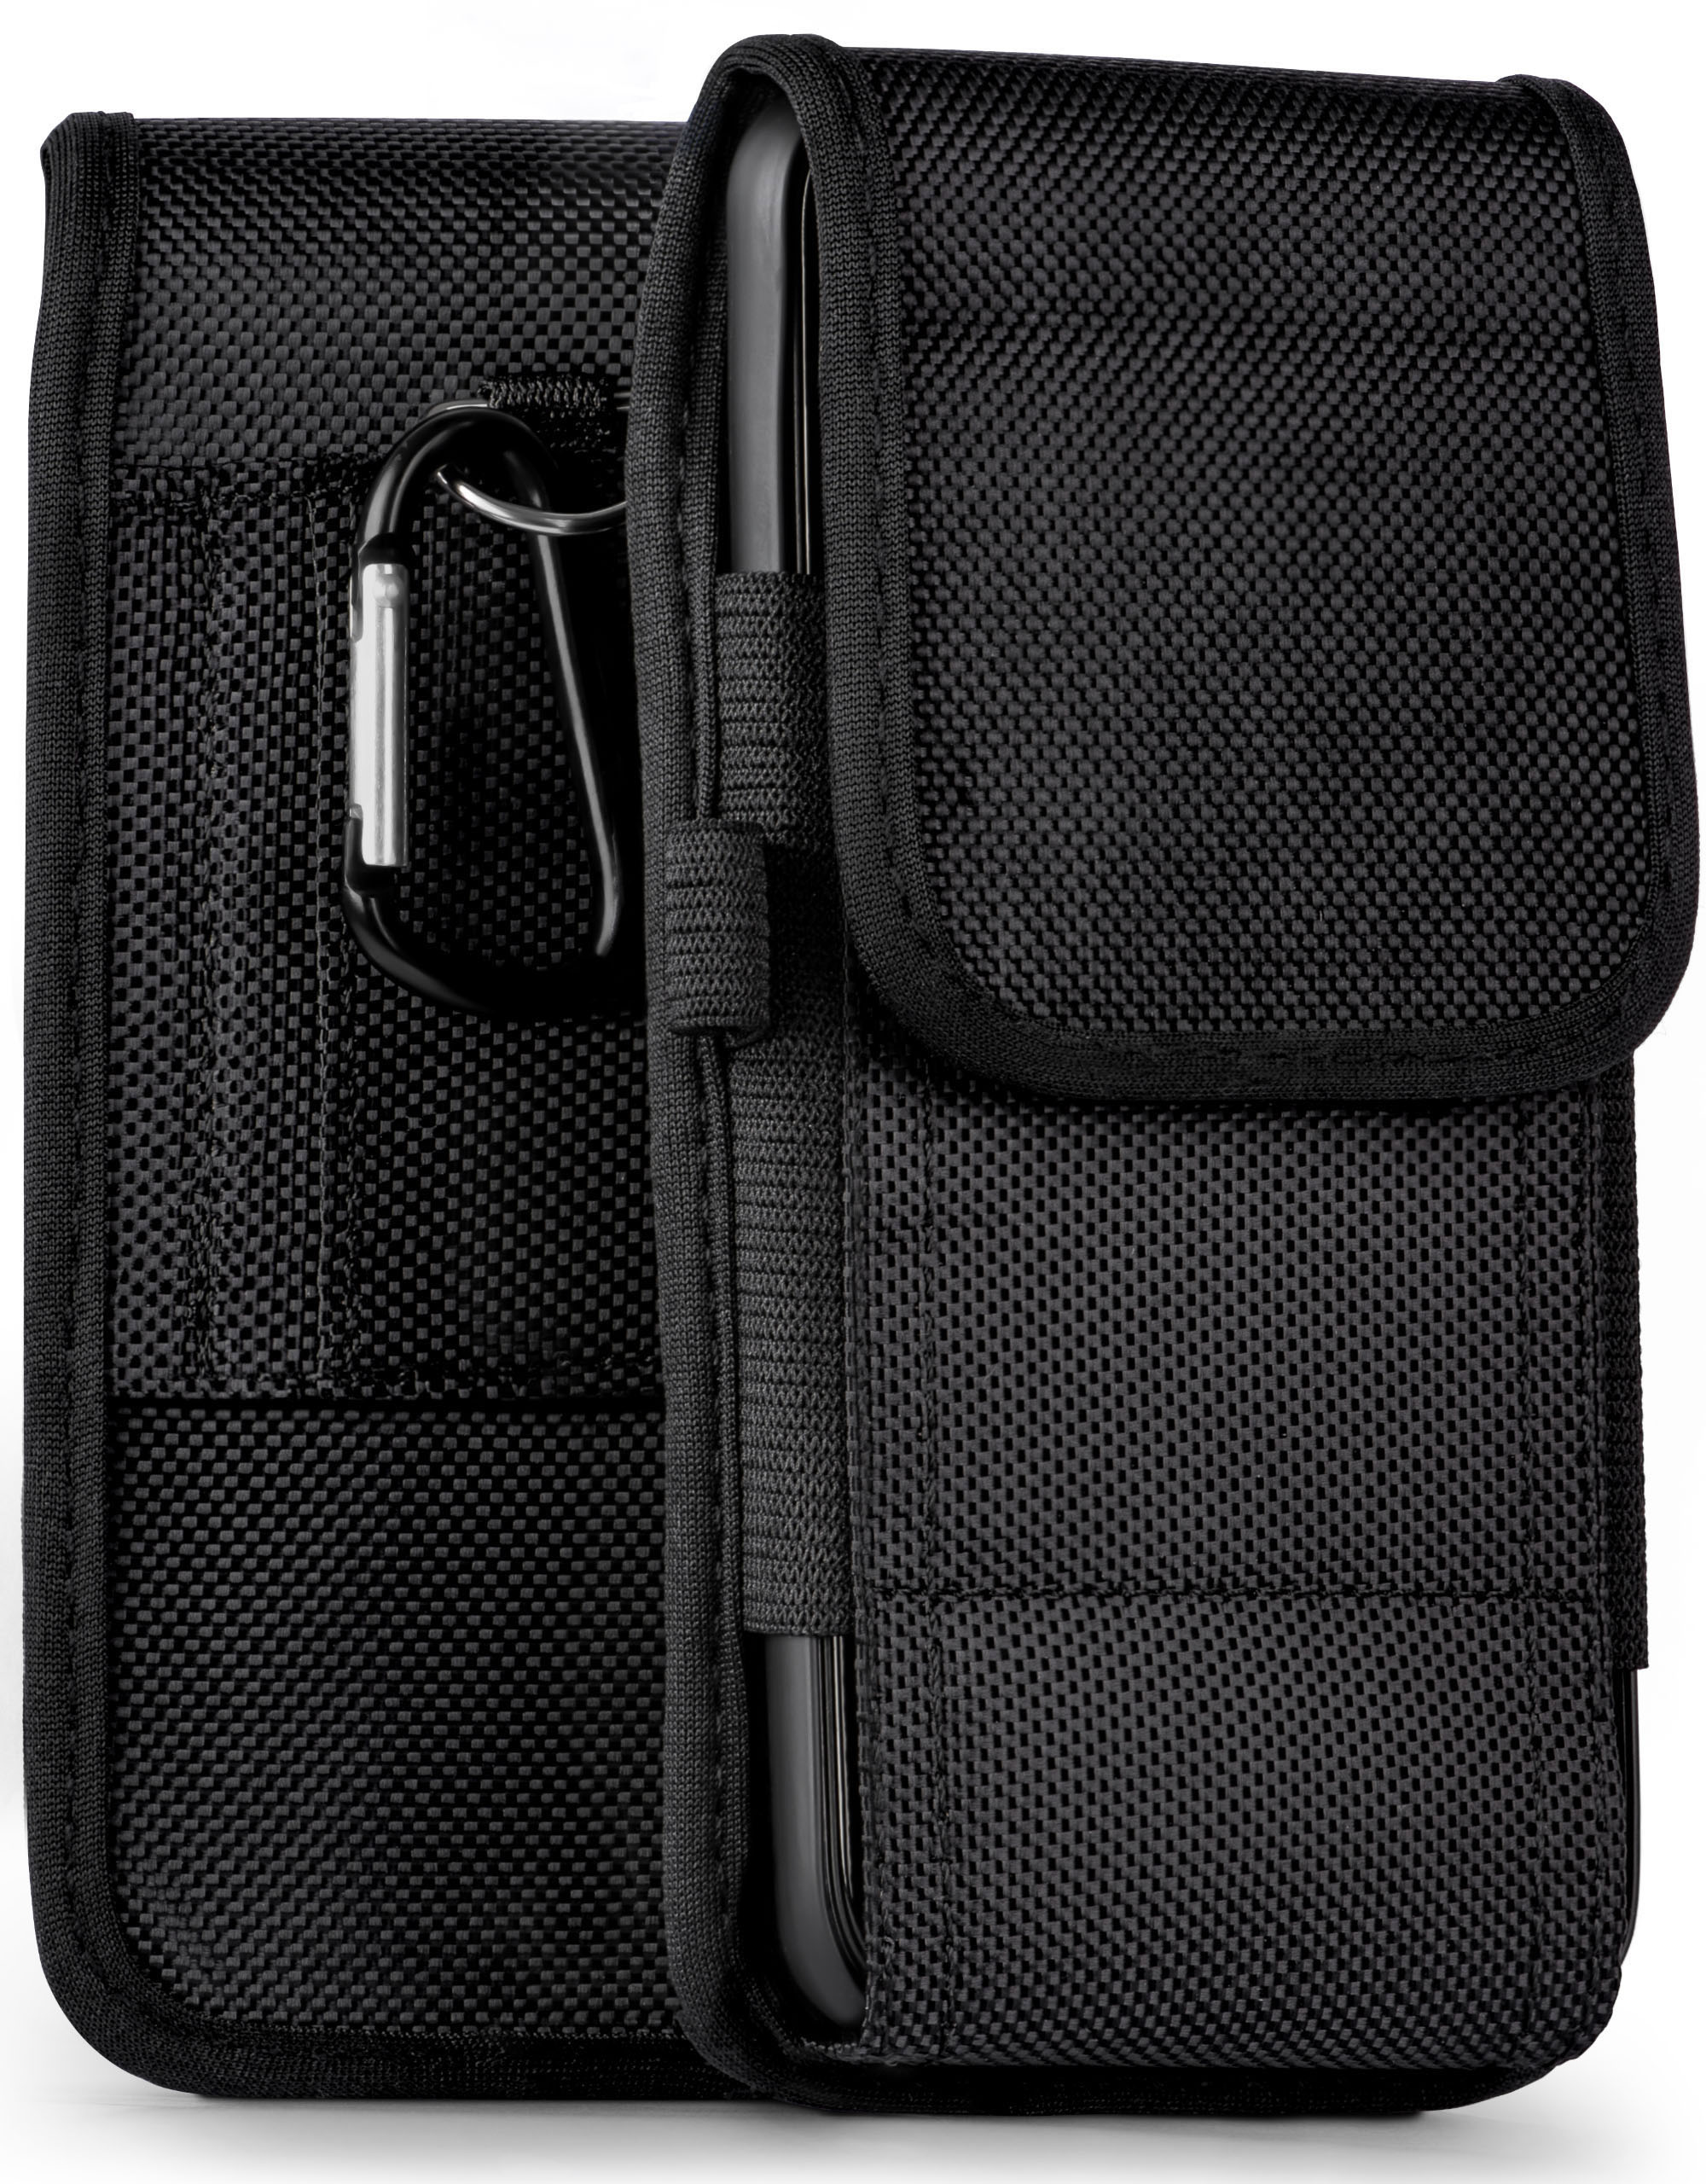 MOEX Agility Case, Neffos TP-Link, Max, Holster, Trail C9